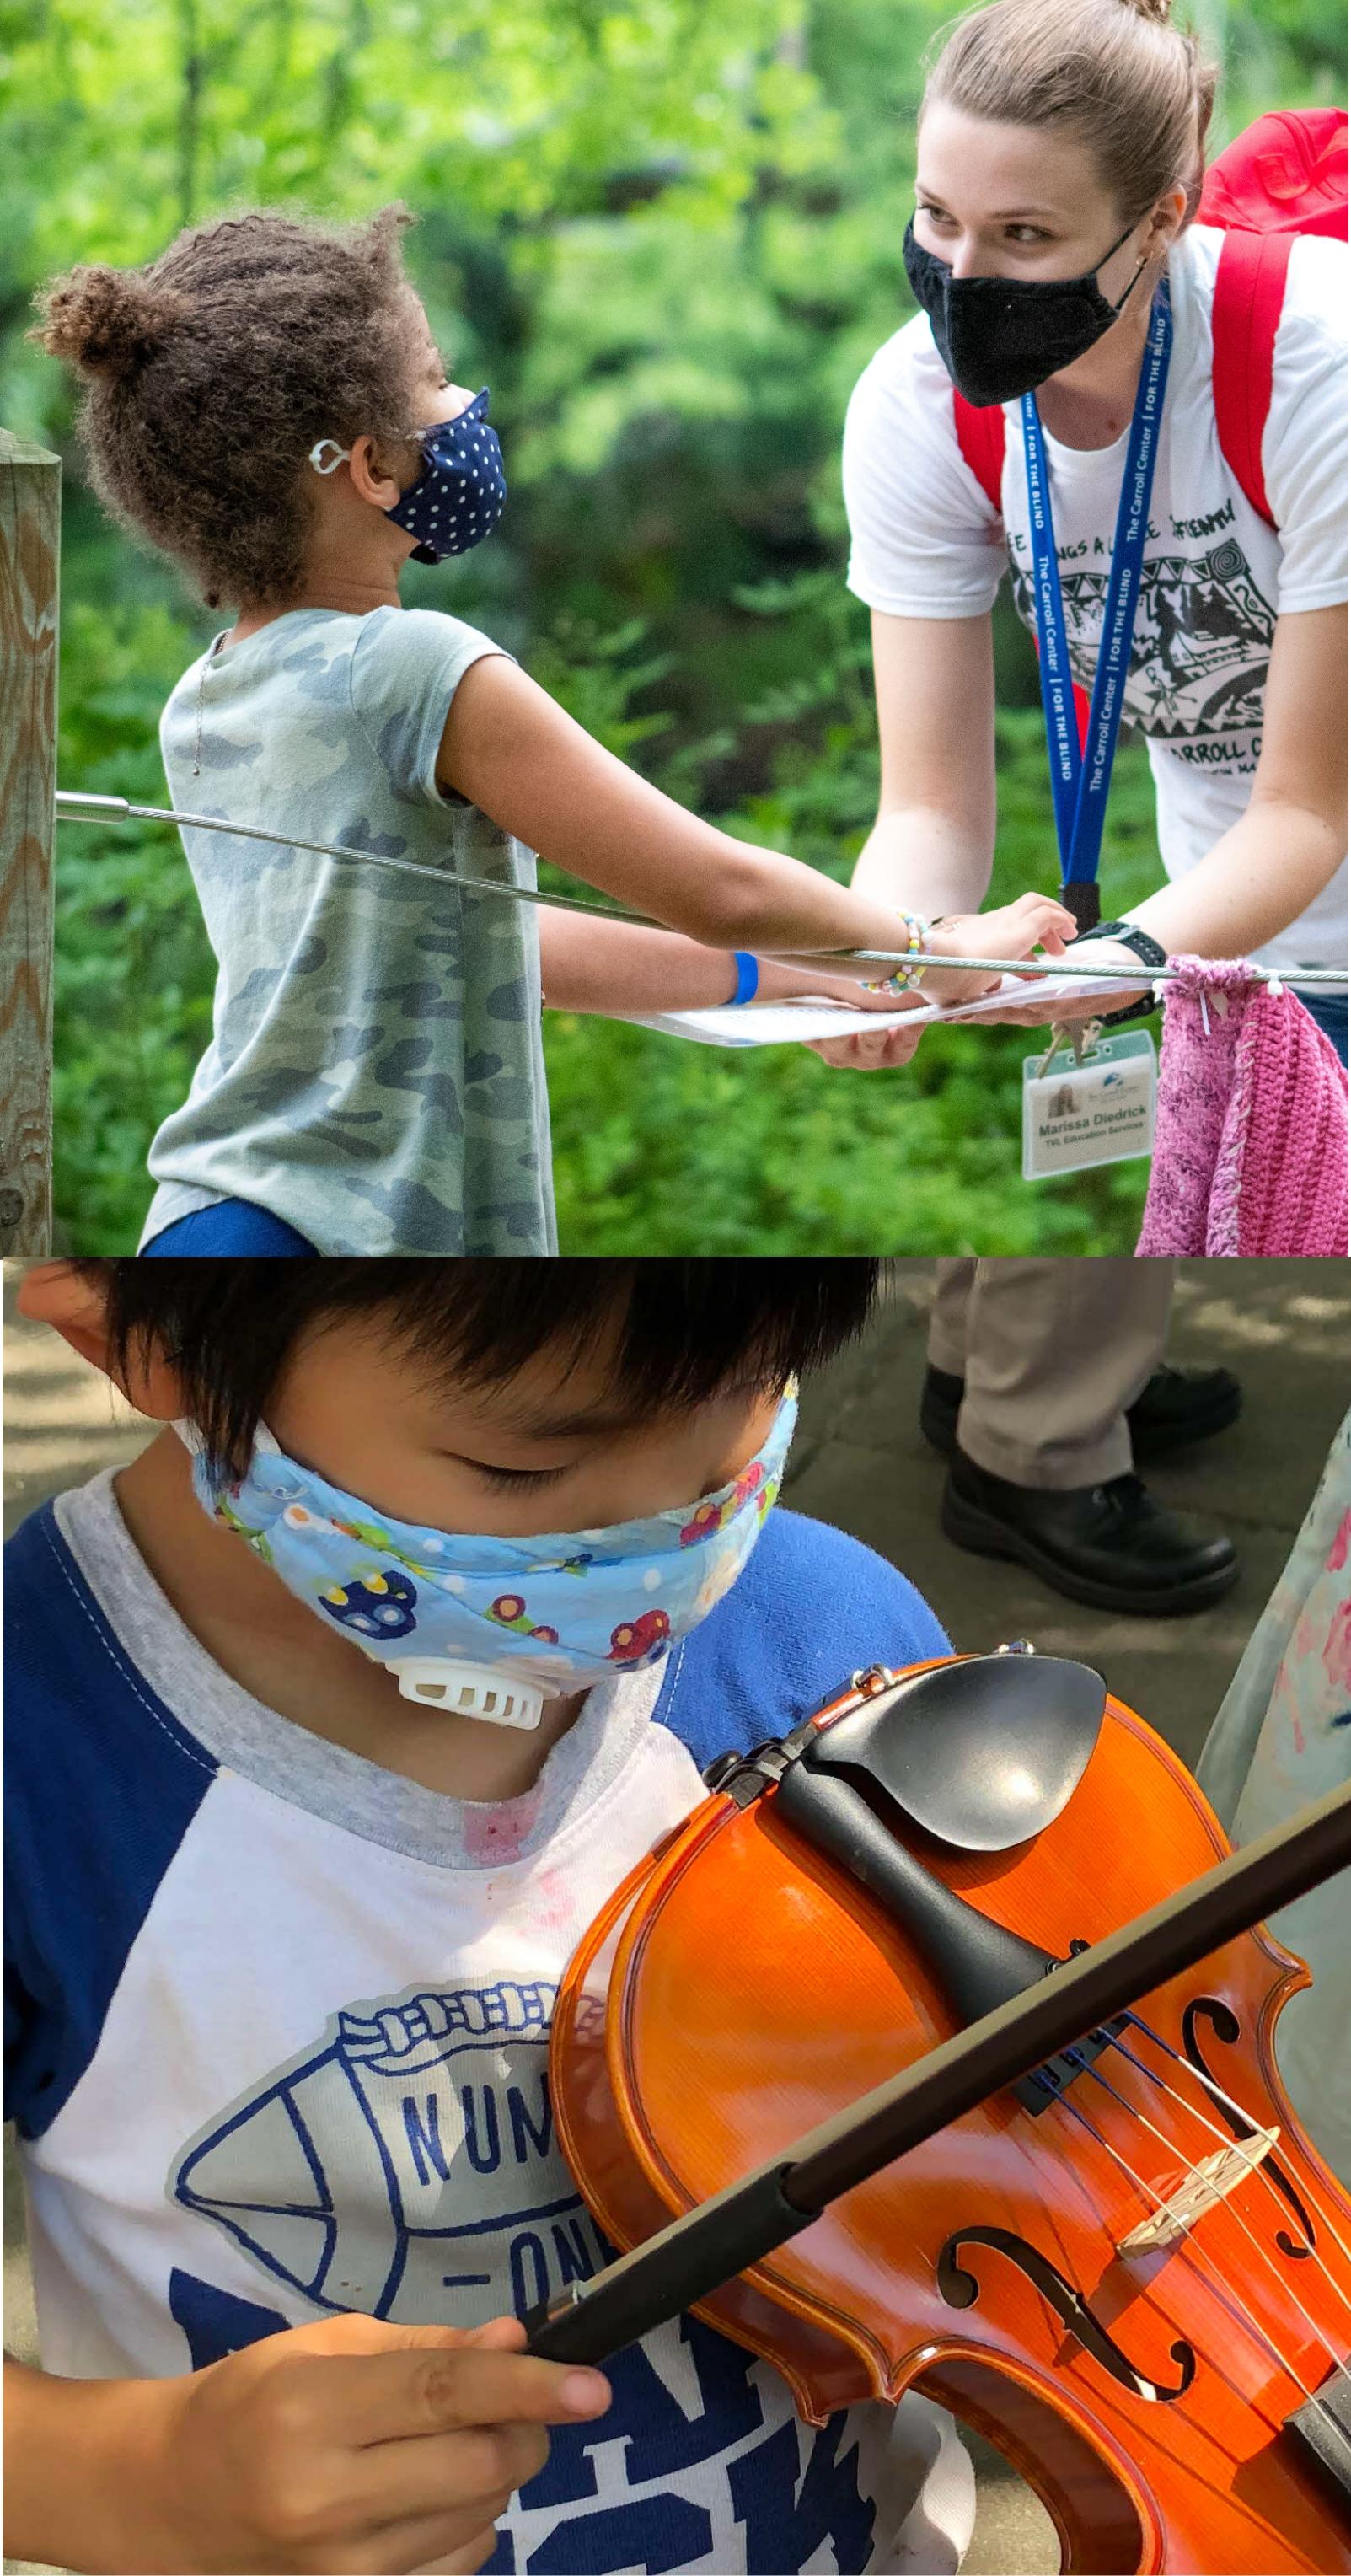 Masked kids and adult outdoors, one playing the violin, the other holding hands with the adult